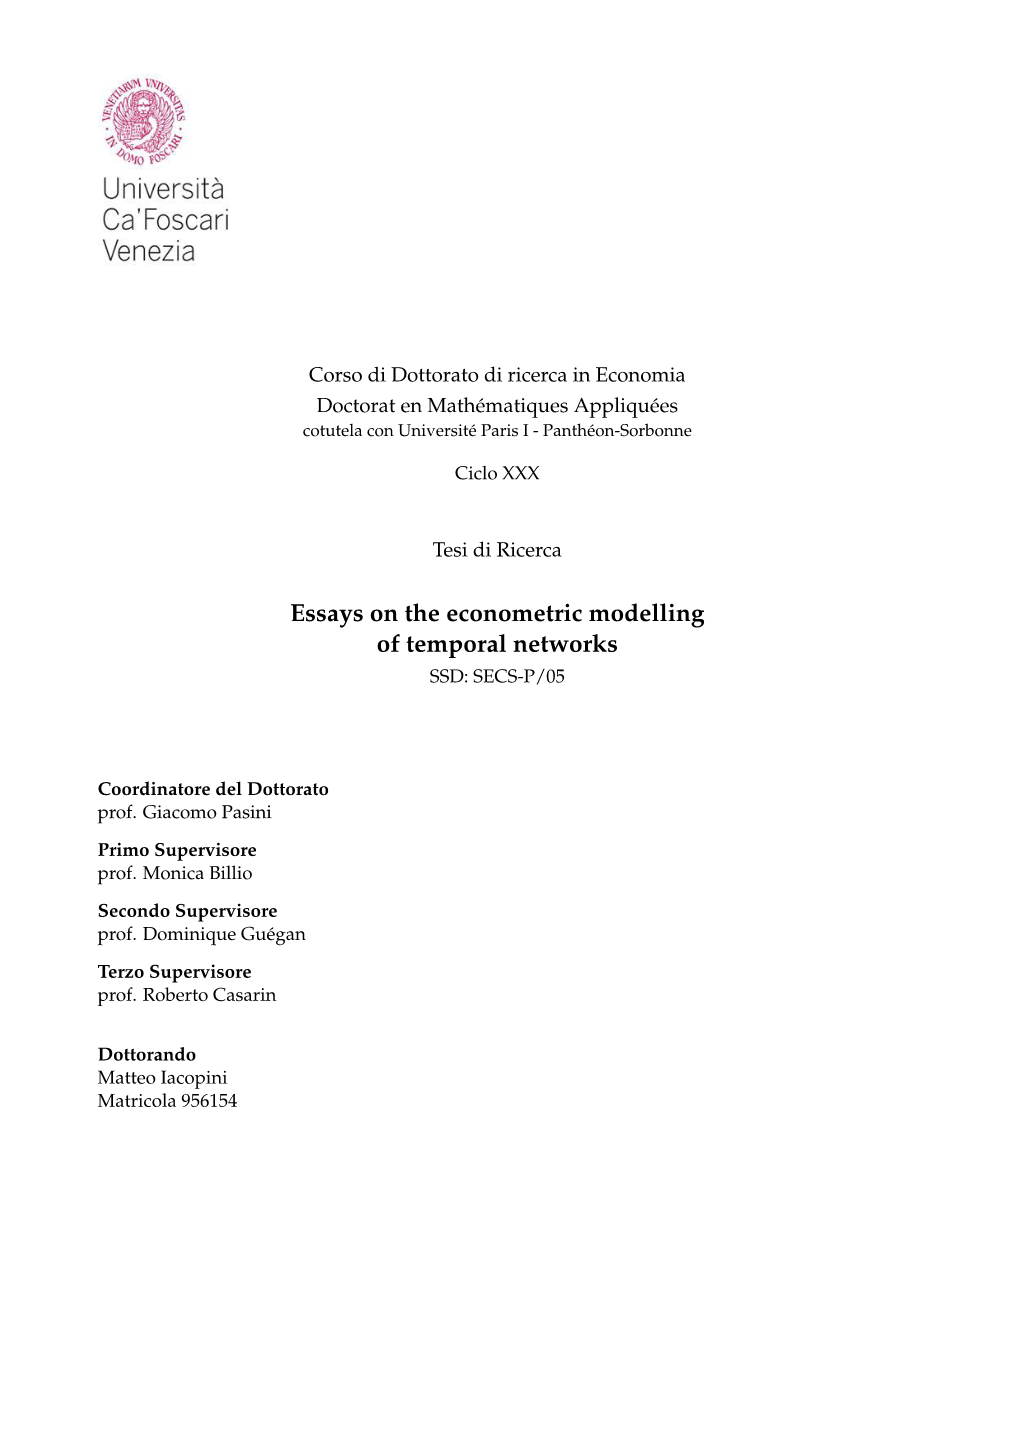 Essays on the Econometric Modelling of Temporal Networks SSD: SECS-P/05